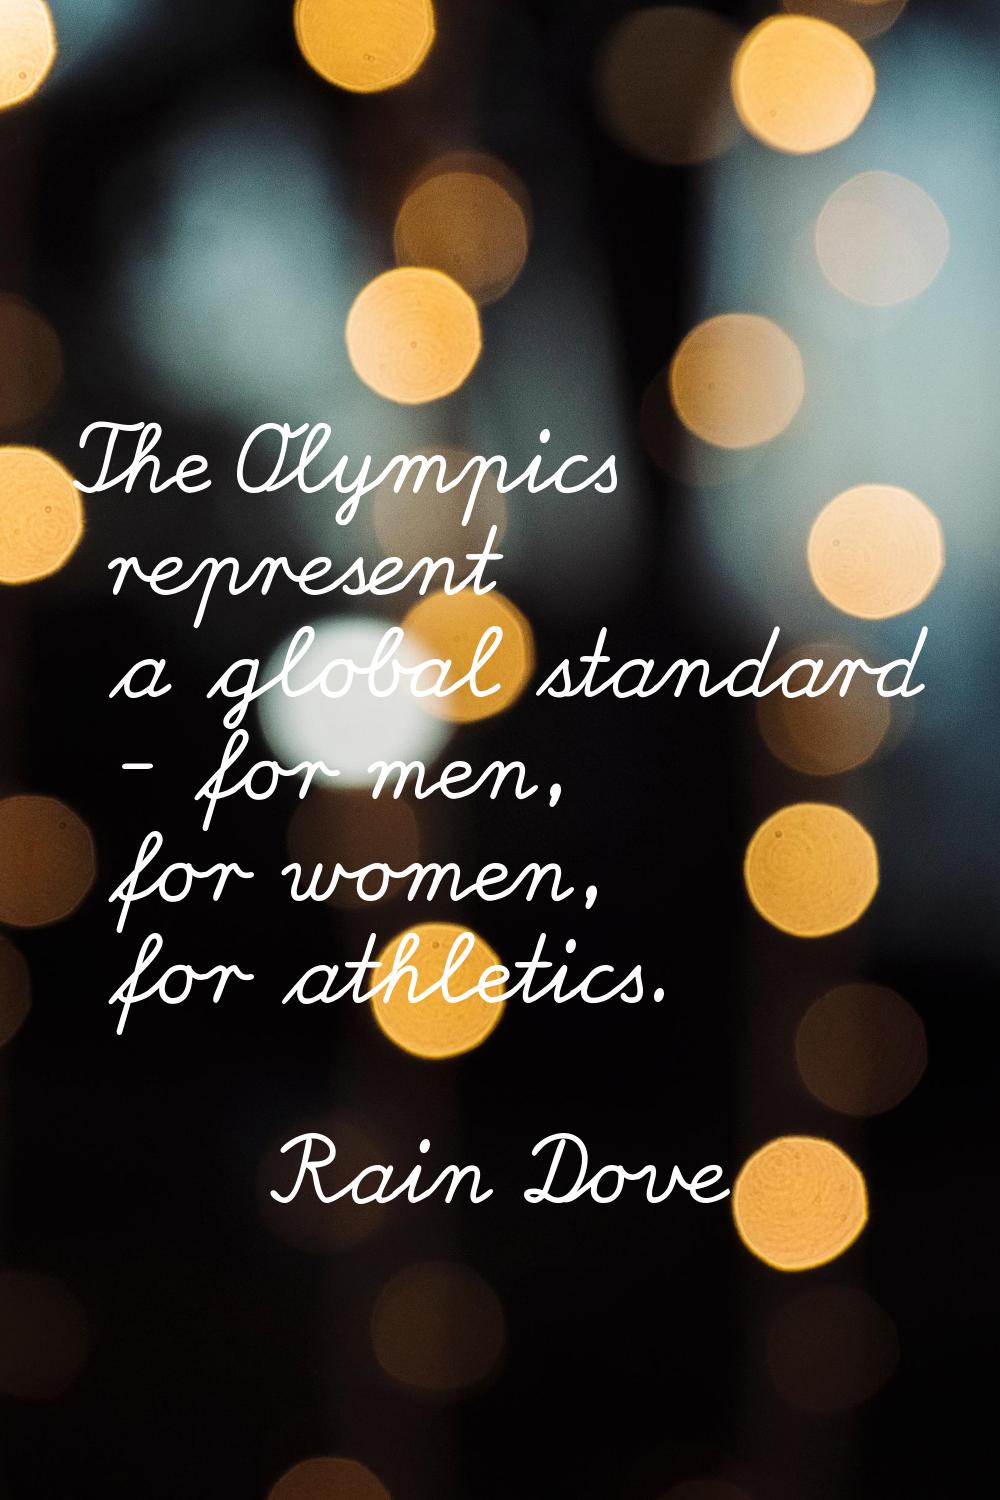 The Olympics represent a global standard - for men, for women, for athletics.